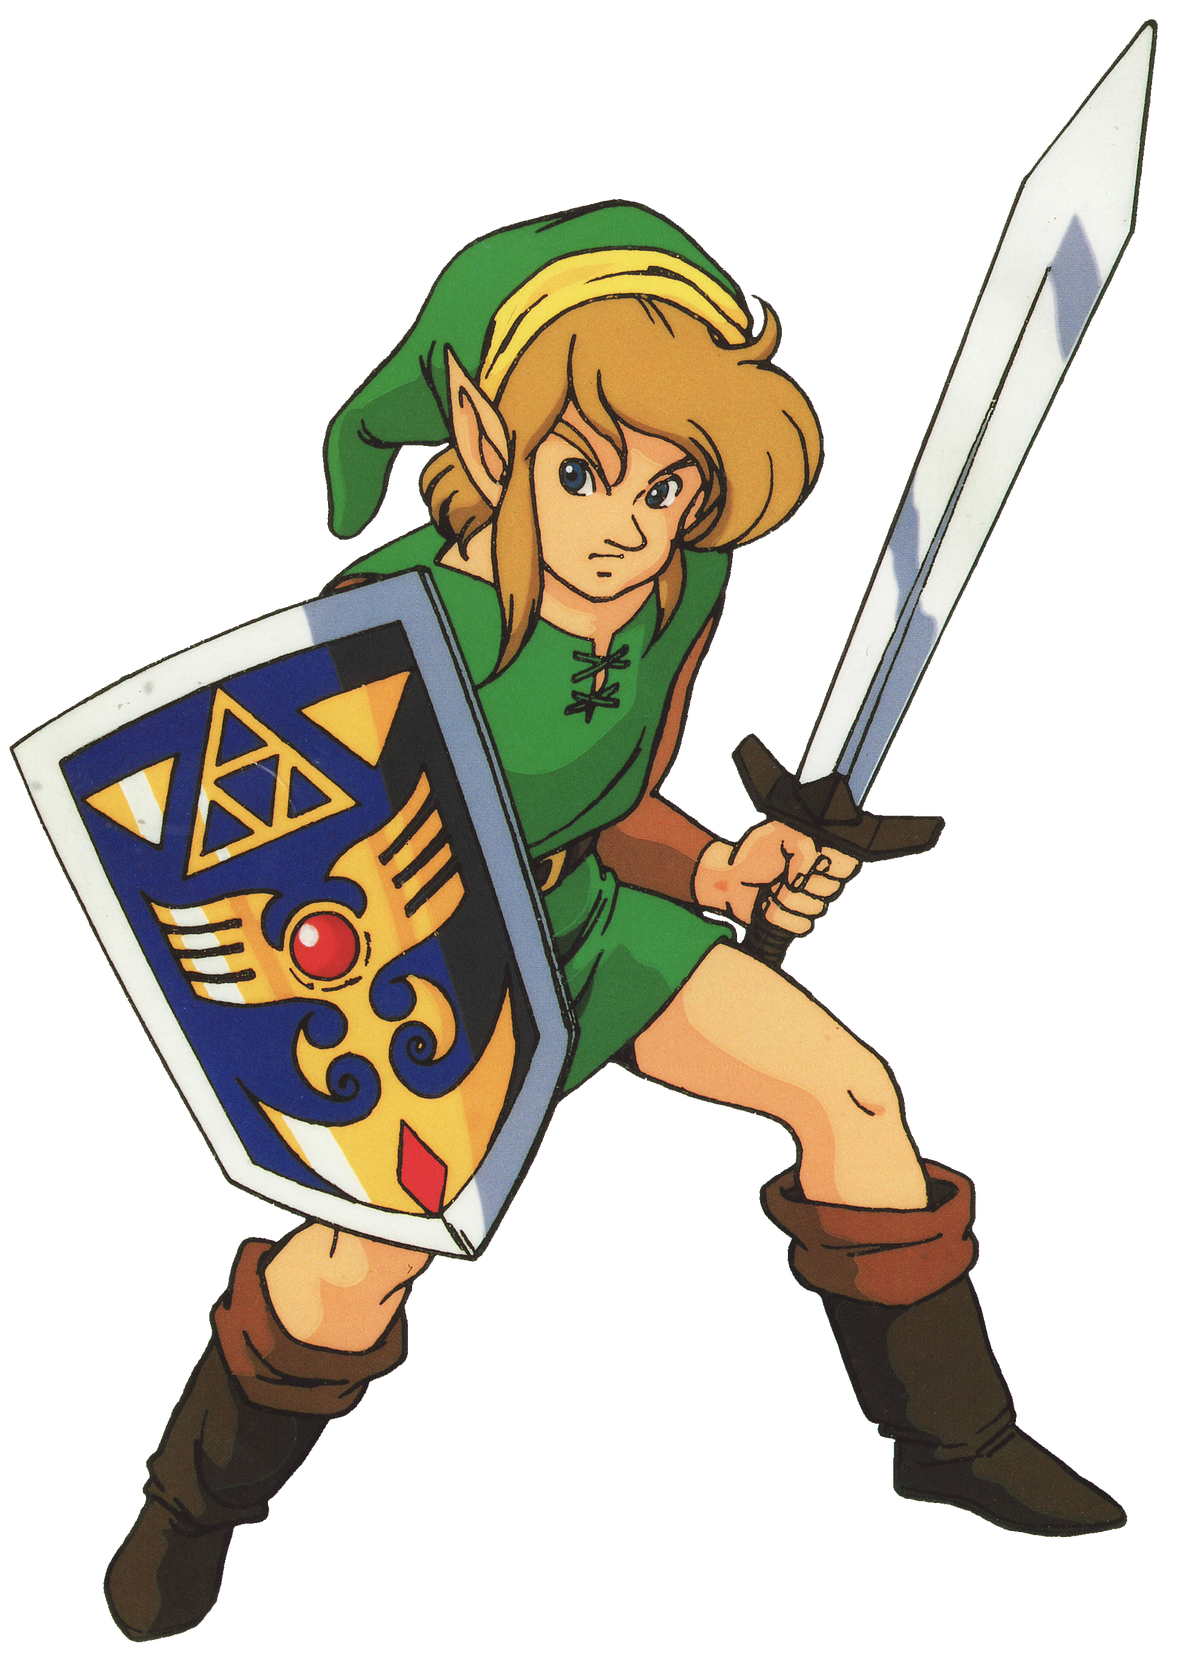 The Legend of Zelda: A Link to the Past - Lutris